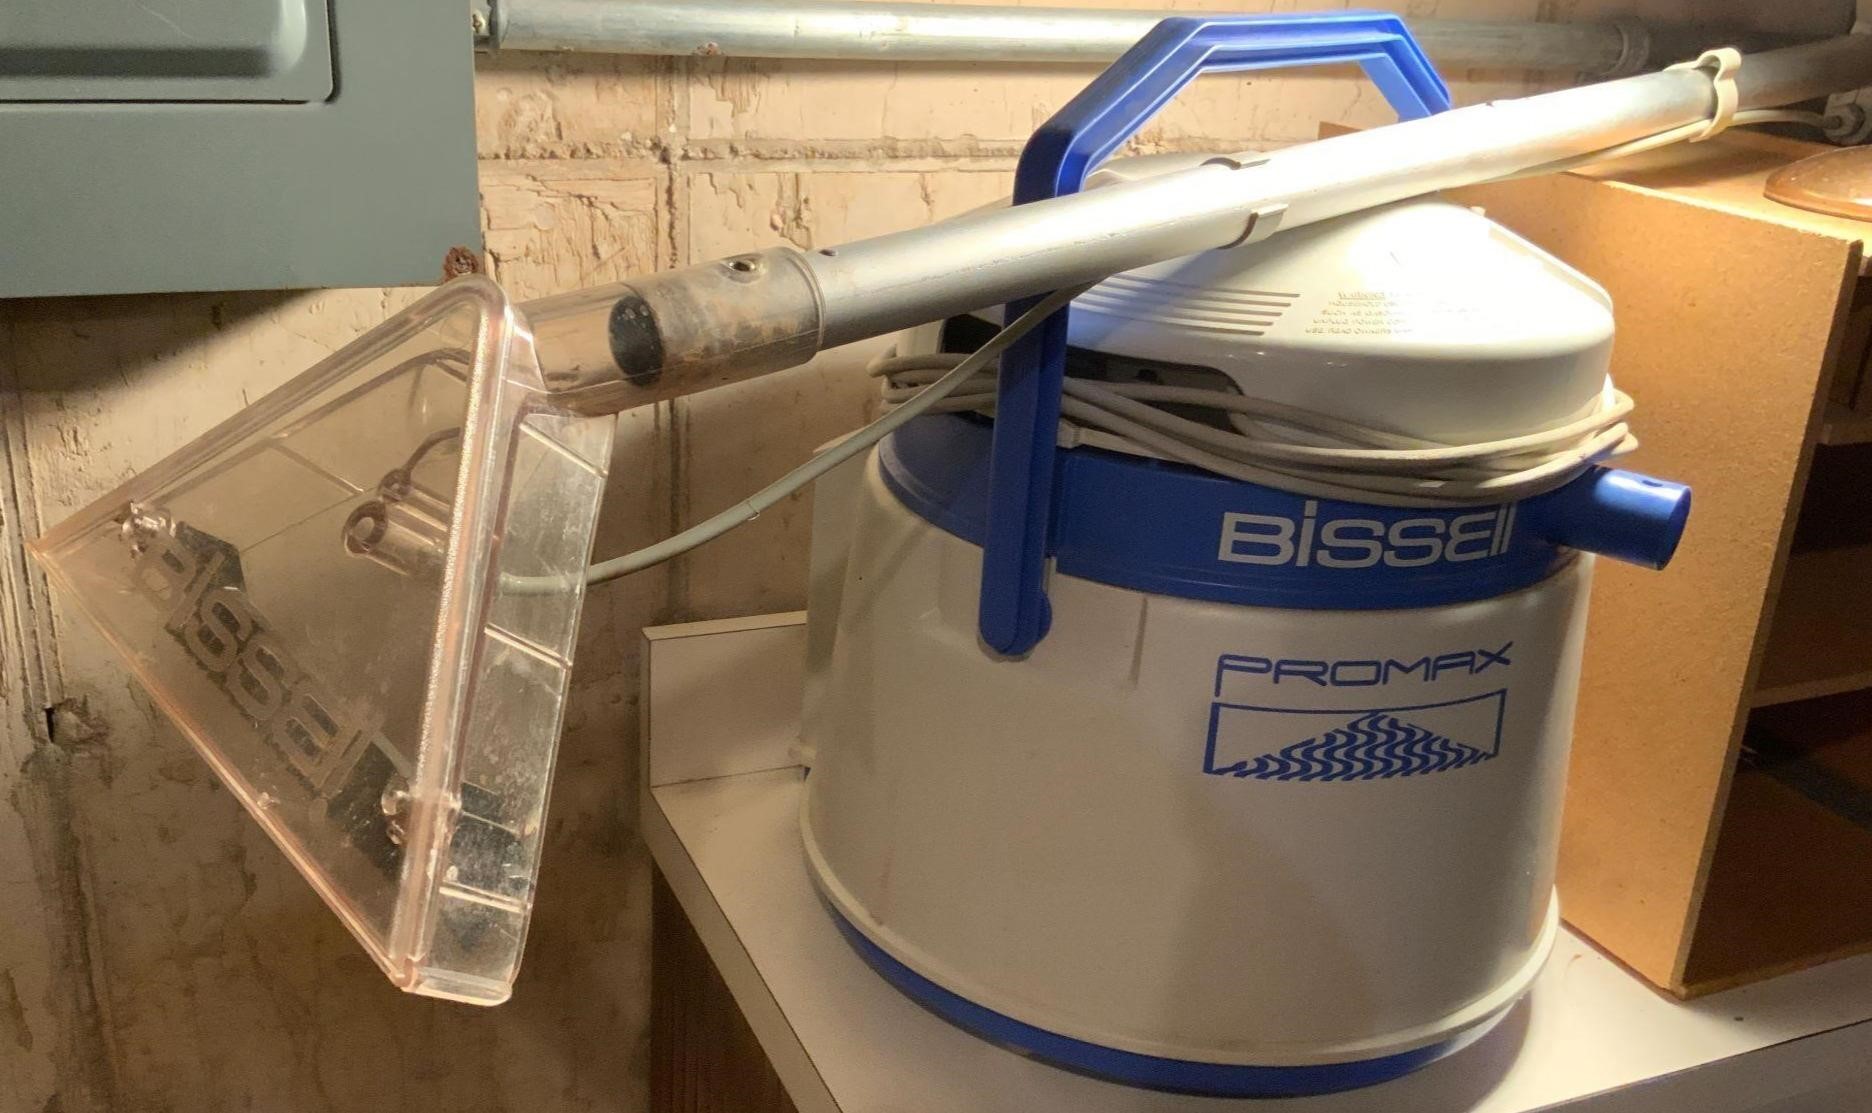 Bissell Promax Carpet Cleaner w/Wand Missing Hose